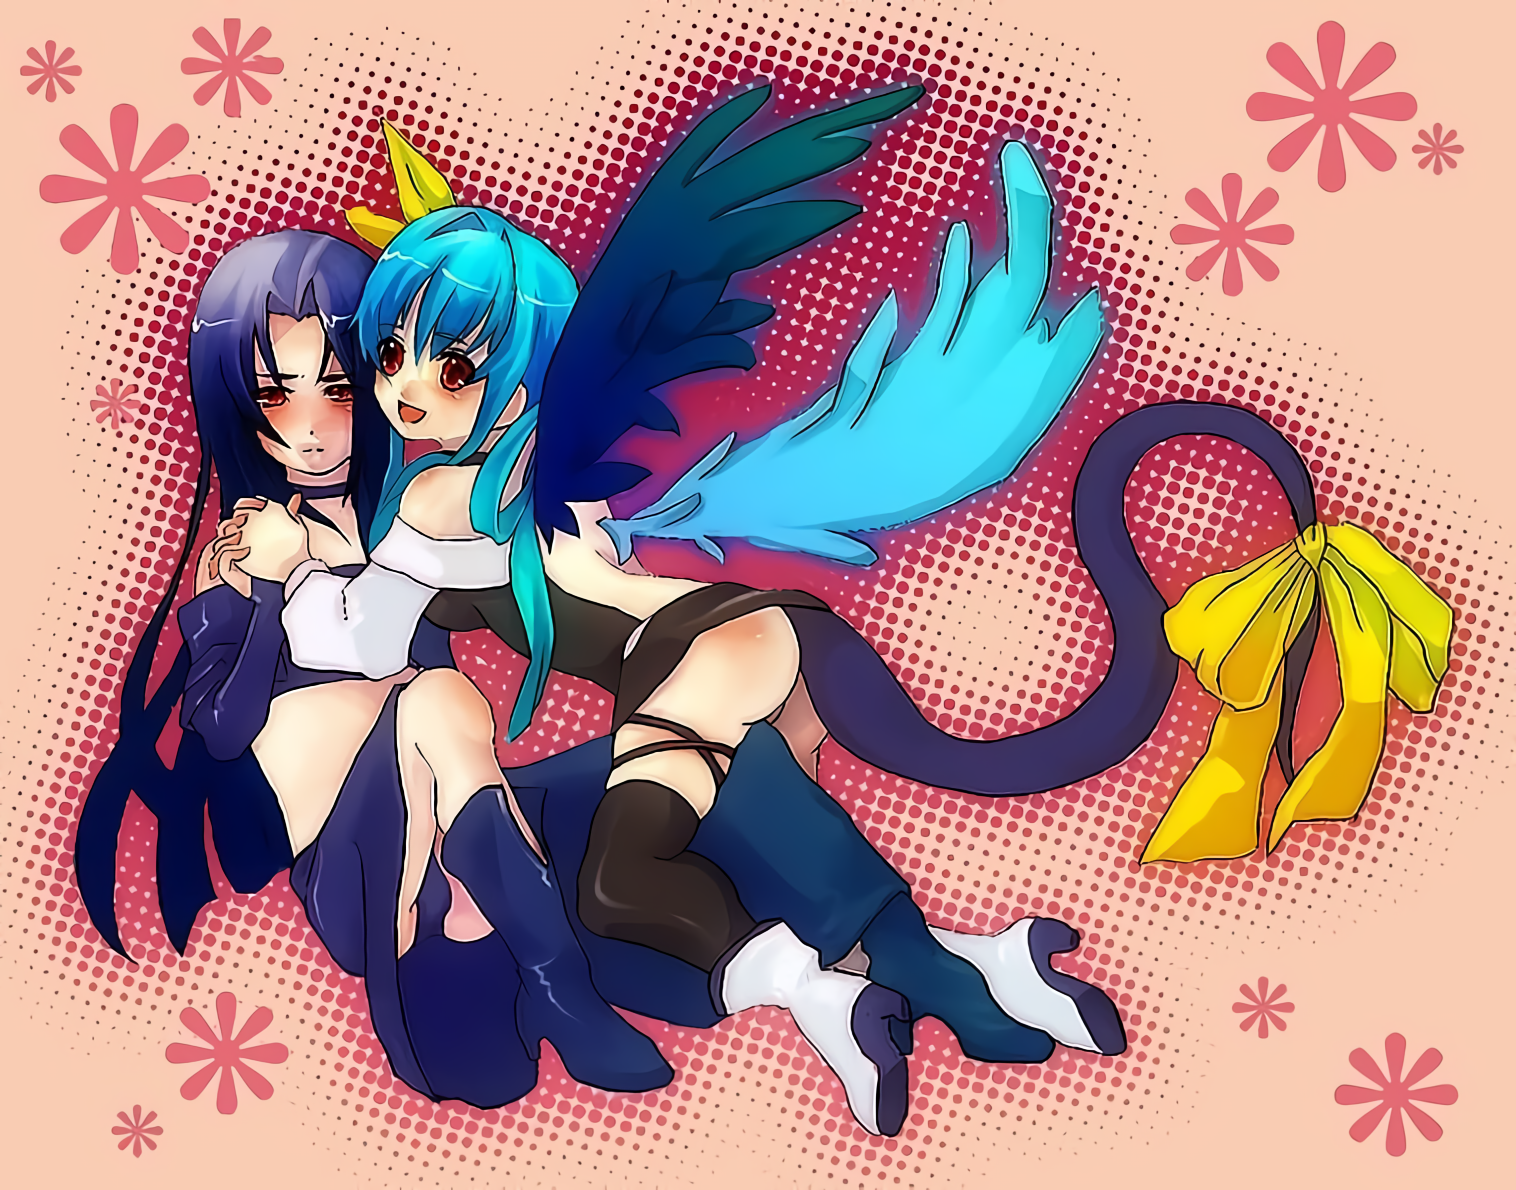 Guilty Gear Dizzy Guilty Gear Testament Guilty Gear Anime Couple Anime Girl With Wings Anime Games T 1516x1190